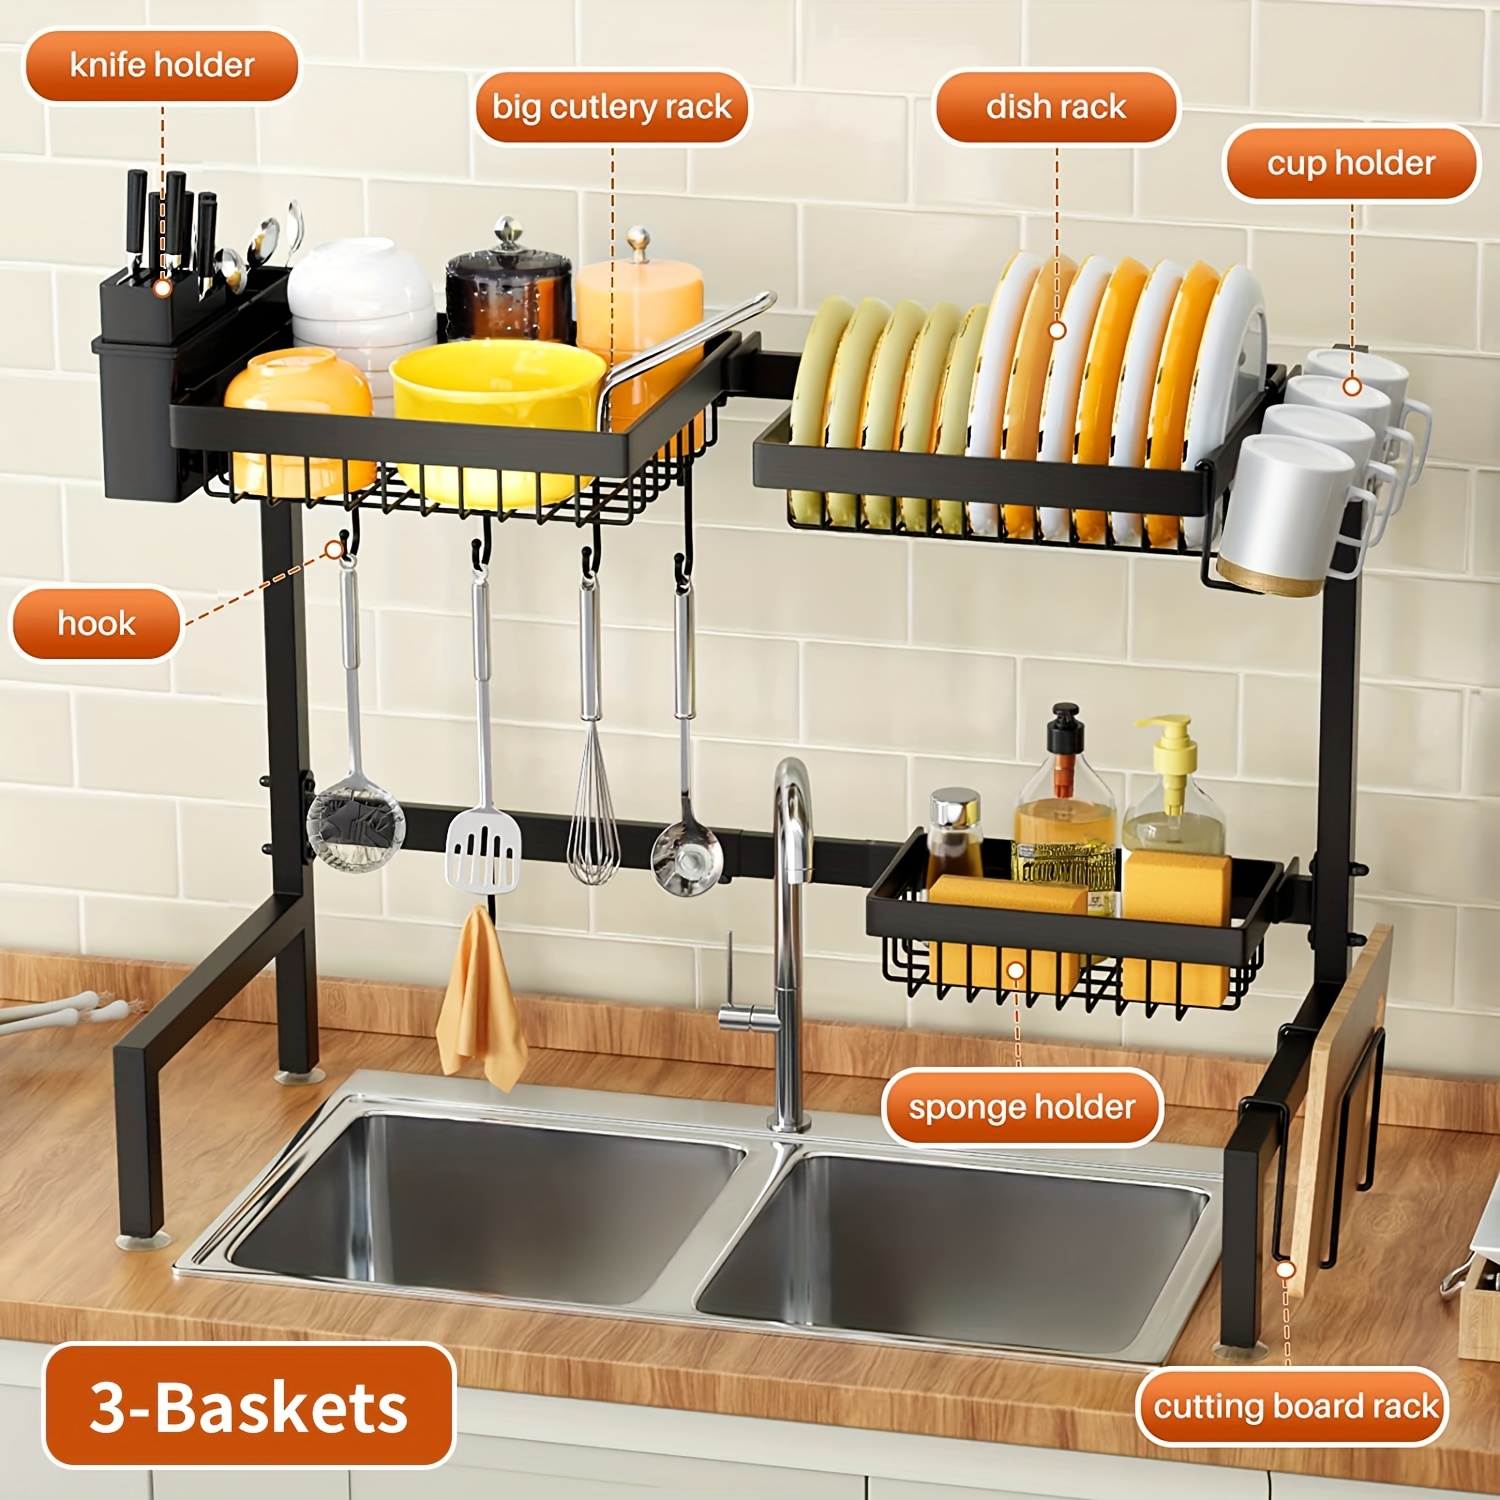 Over the Sink Dish Drying Rack - 3 Tier Stainless Steel Large Kitchen Rack  Dish Drainers for Home Kitchen Counter Storage, Shelf with Utensil Holder, Above  Sink Non-Slip Shelves Organizer 